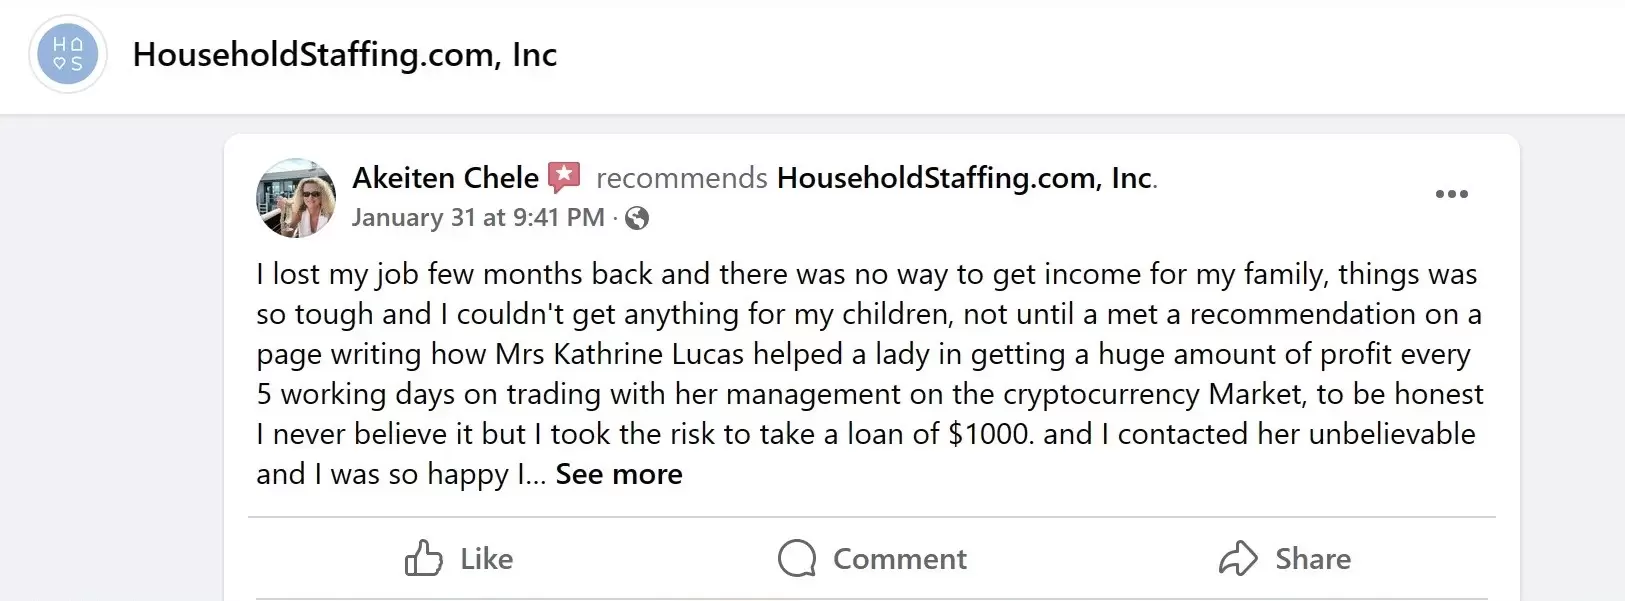 positive review of HouseholdStaffing.com